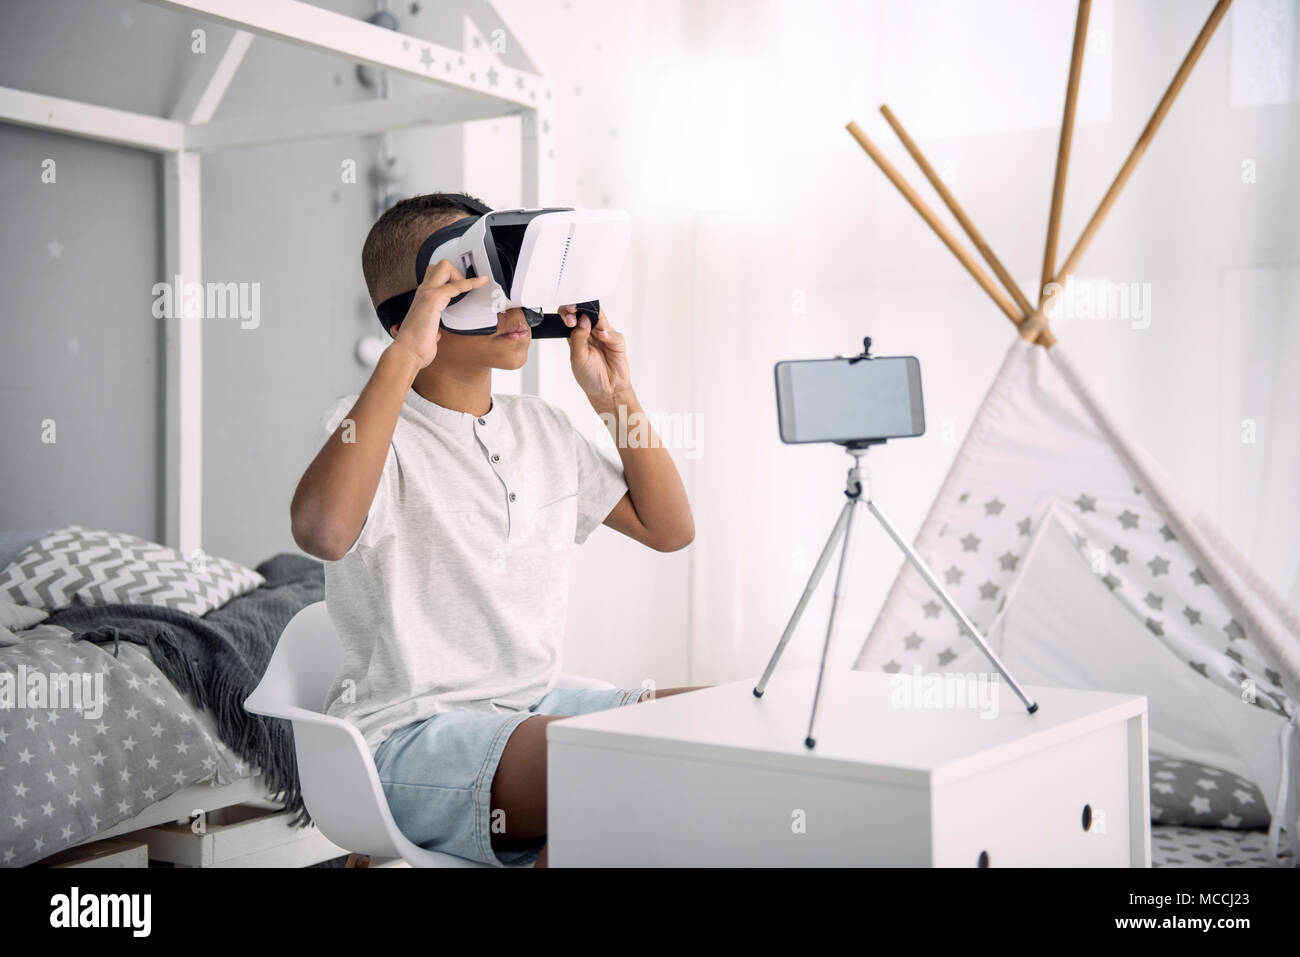 Serious boy blogger experimenting with VR headset Stock Photo